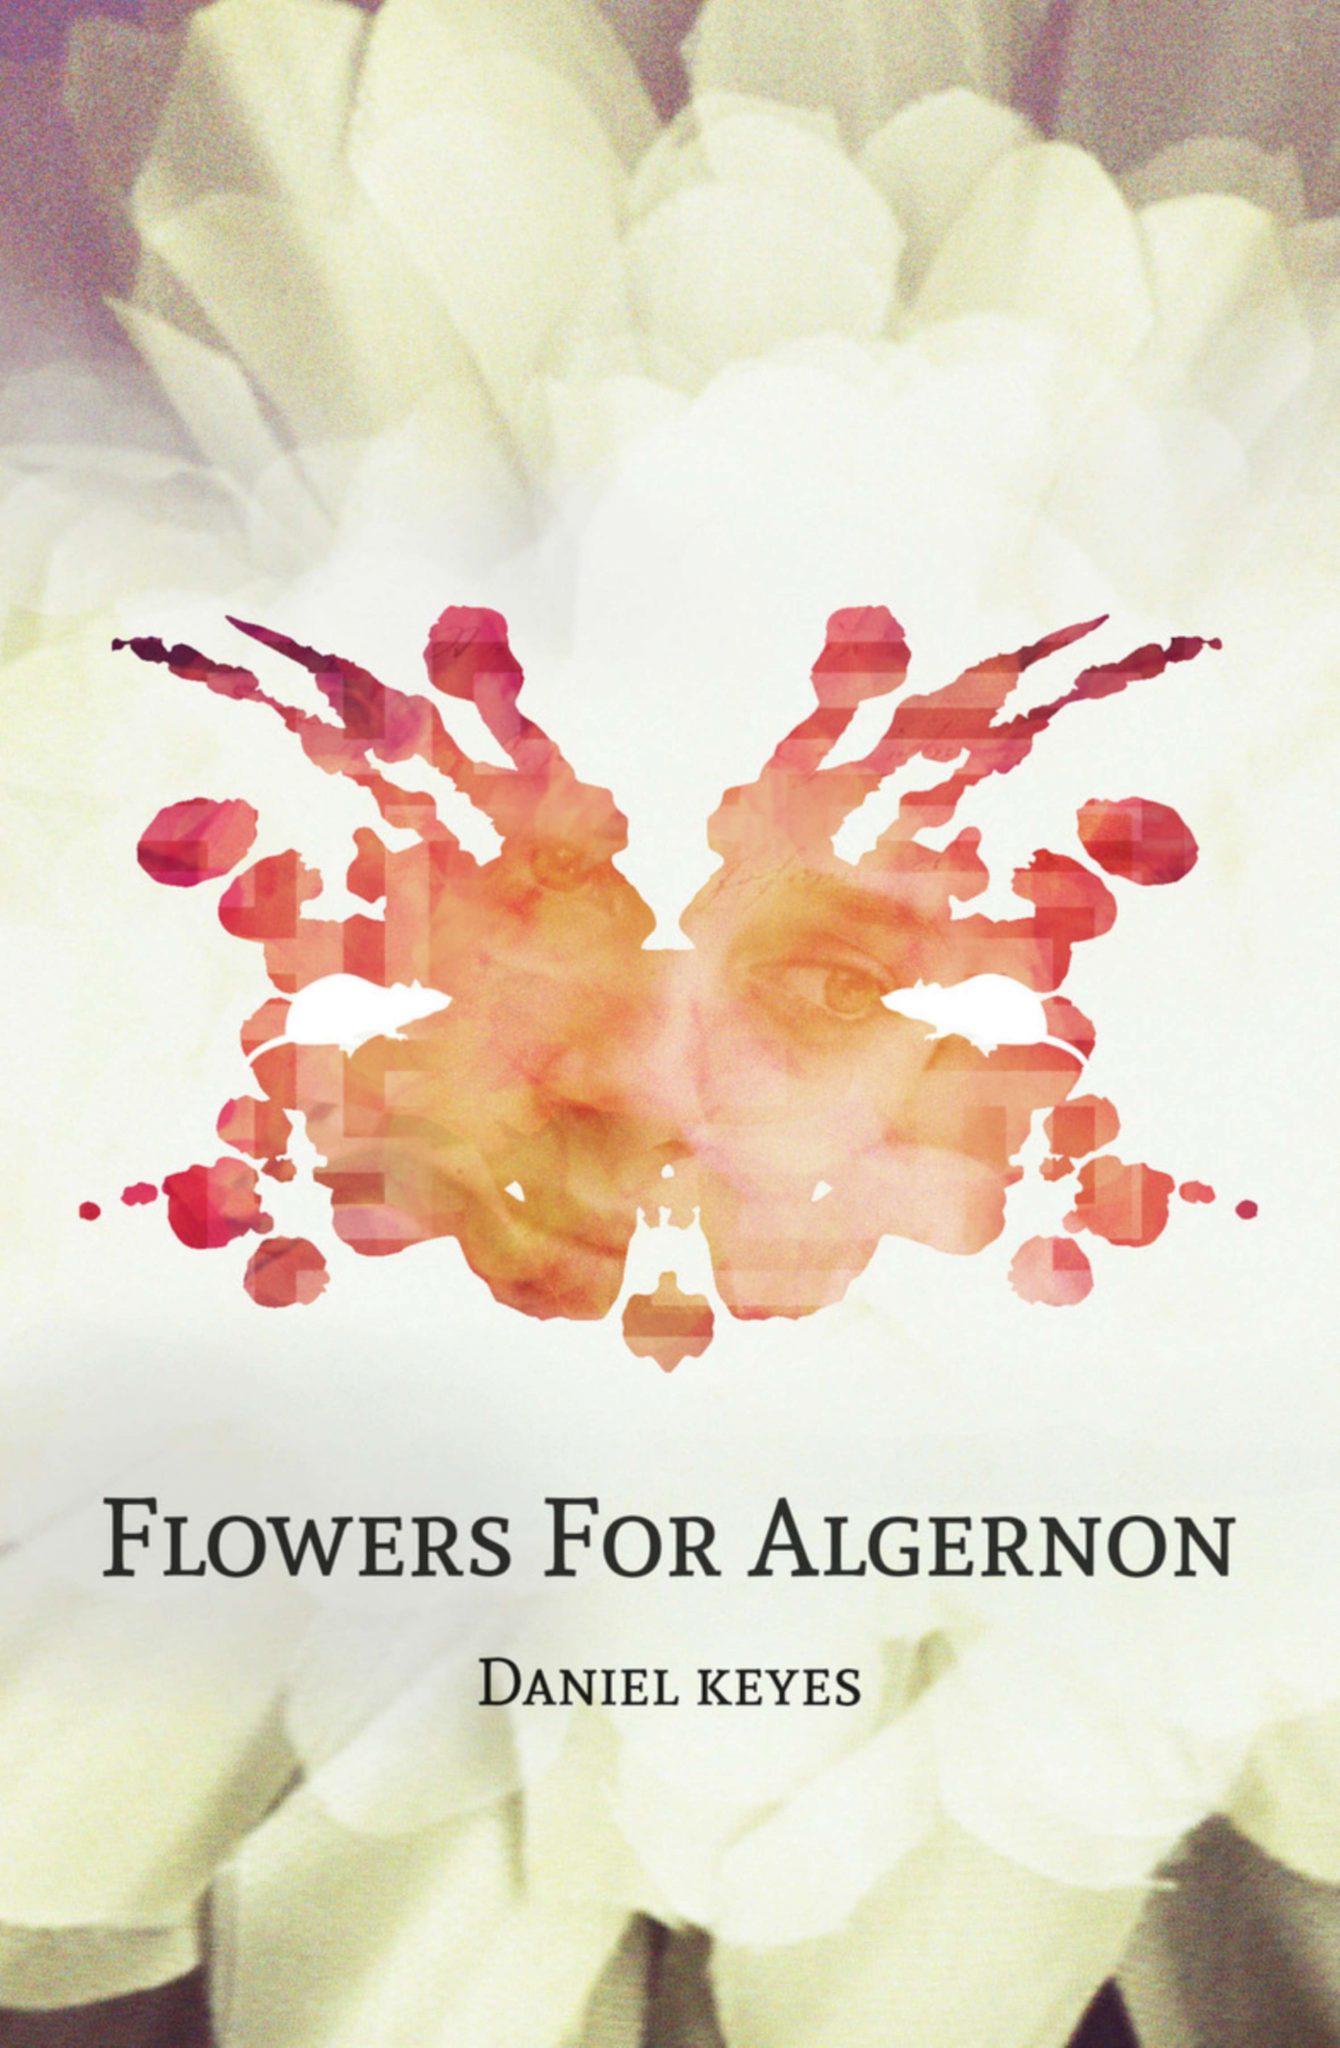 Flowers for Algernon Characters and Analysis